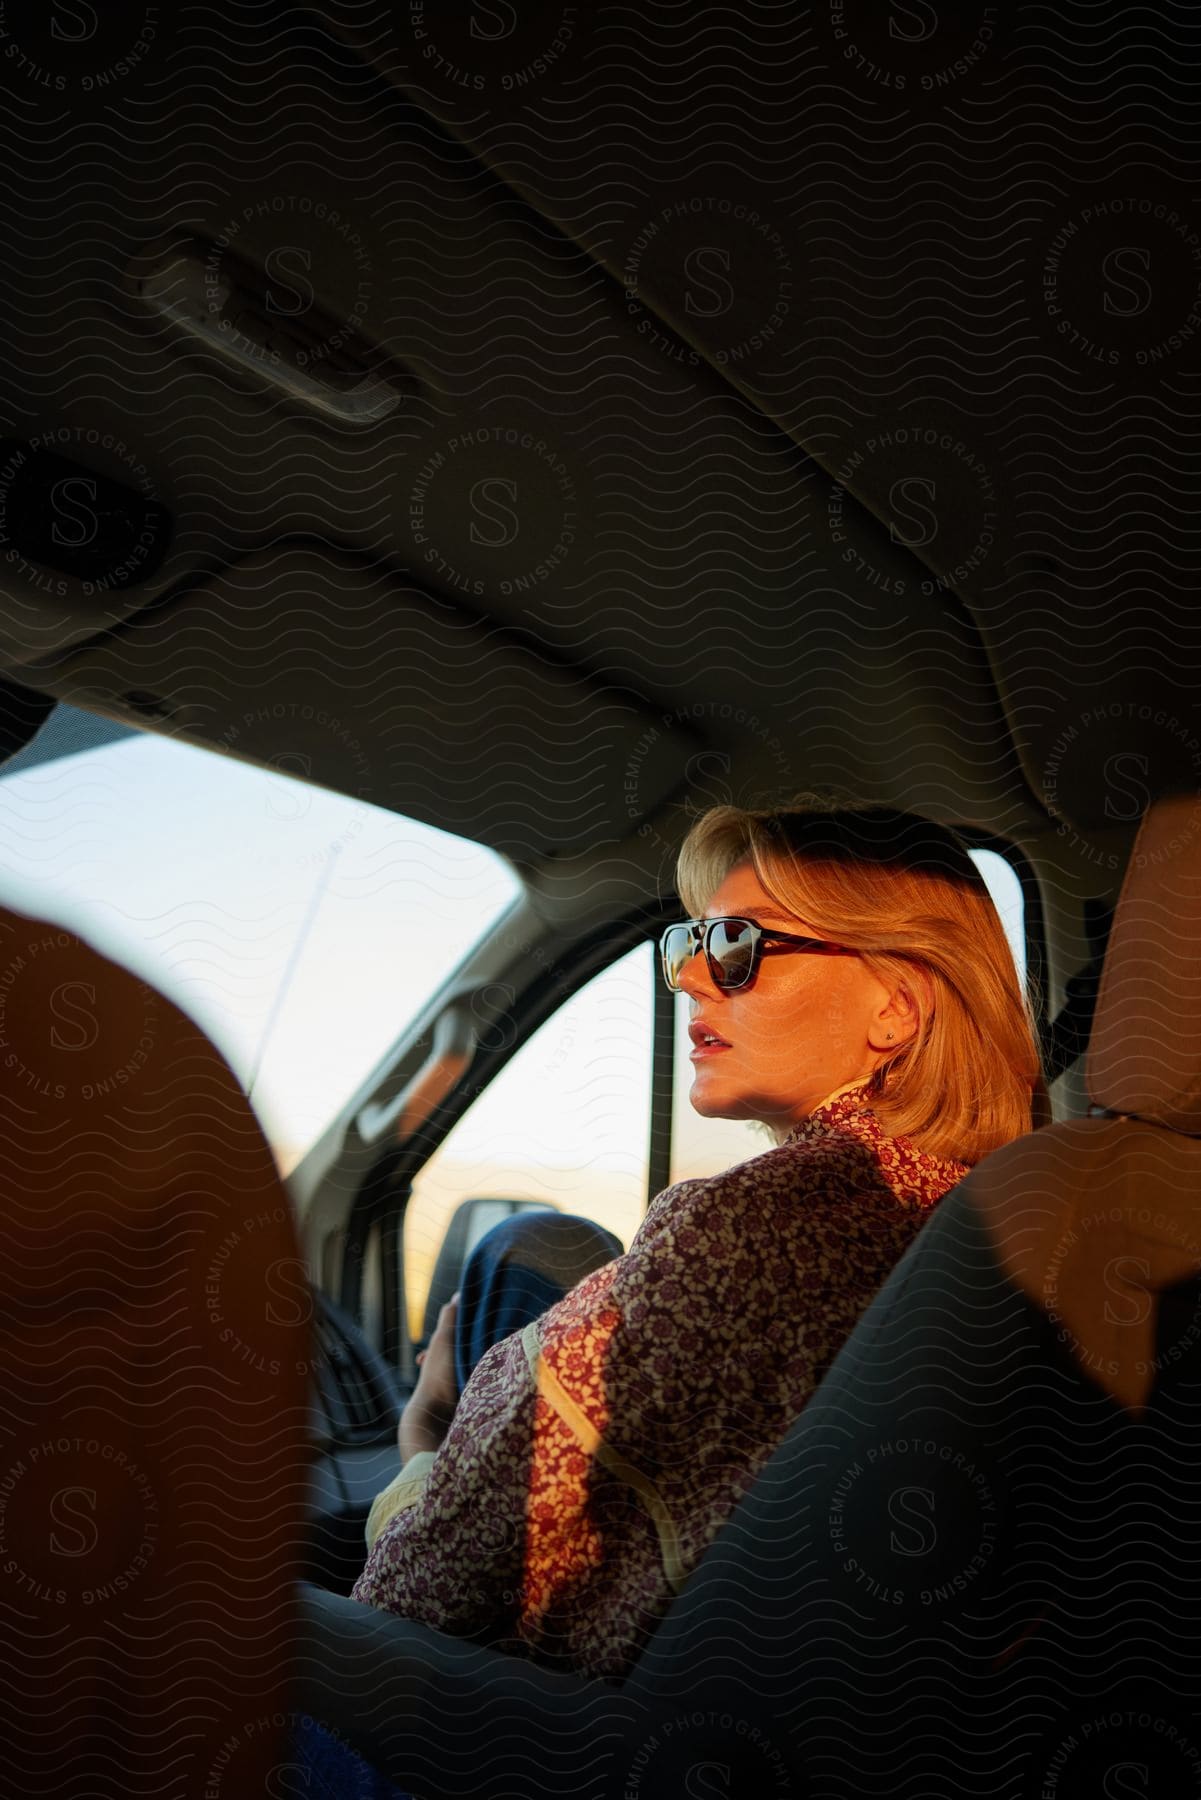 A blonde woman is wearing sunglasses while sitting in a car and she is having her face illuminated by natural light